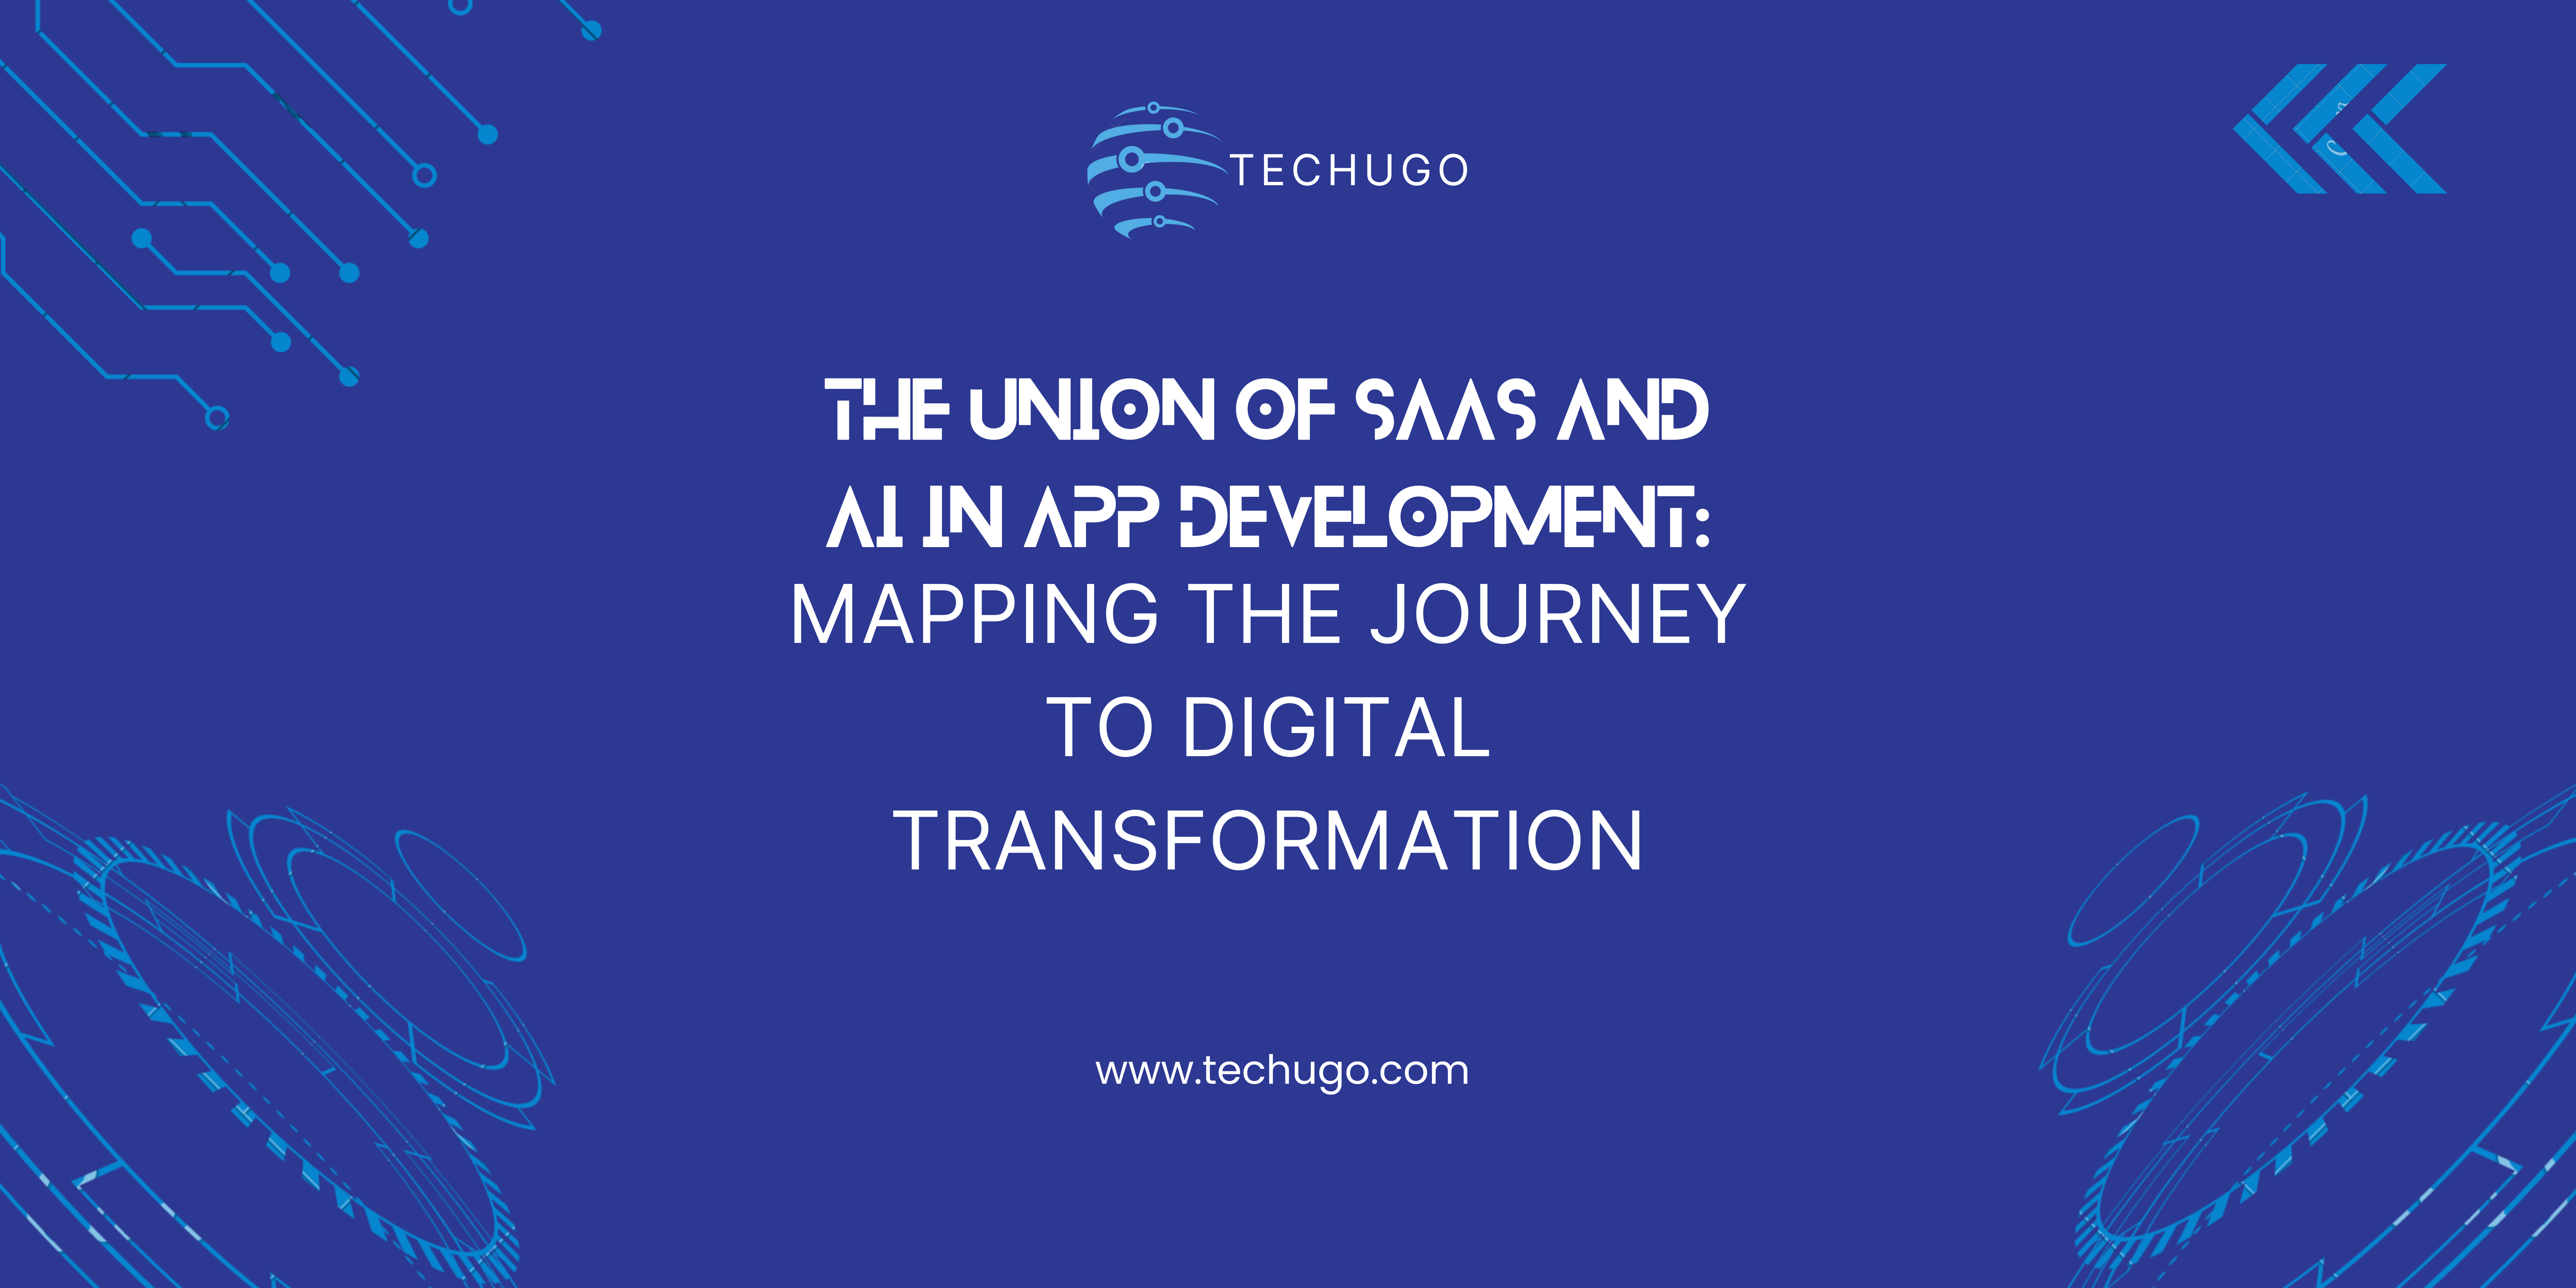 The Union of SaaS and AI in App Development: Mapping the Journey to Digital Transformation